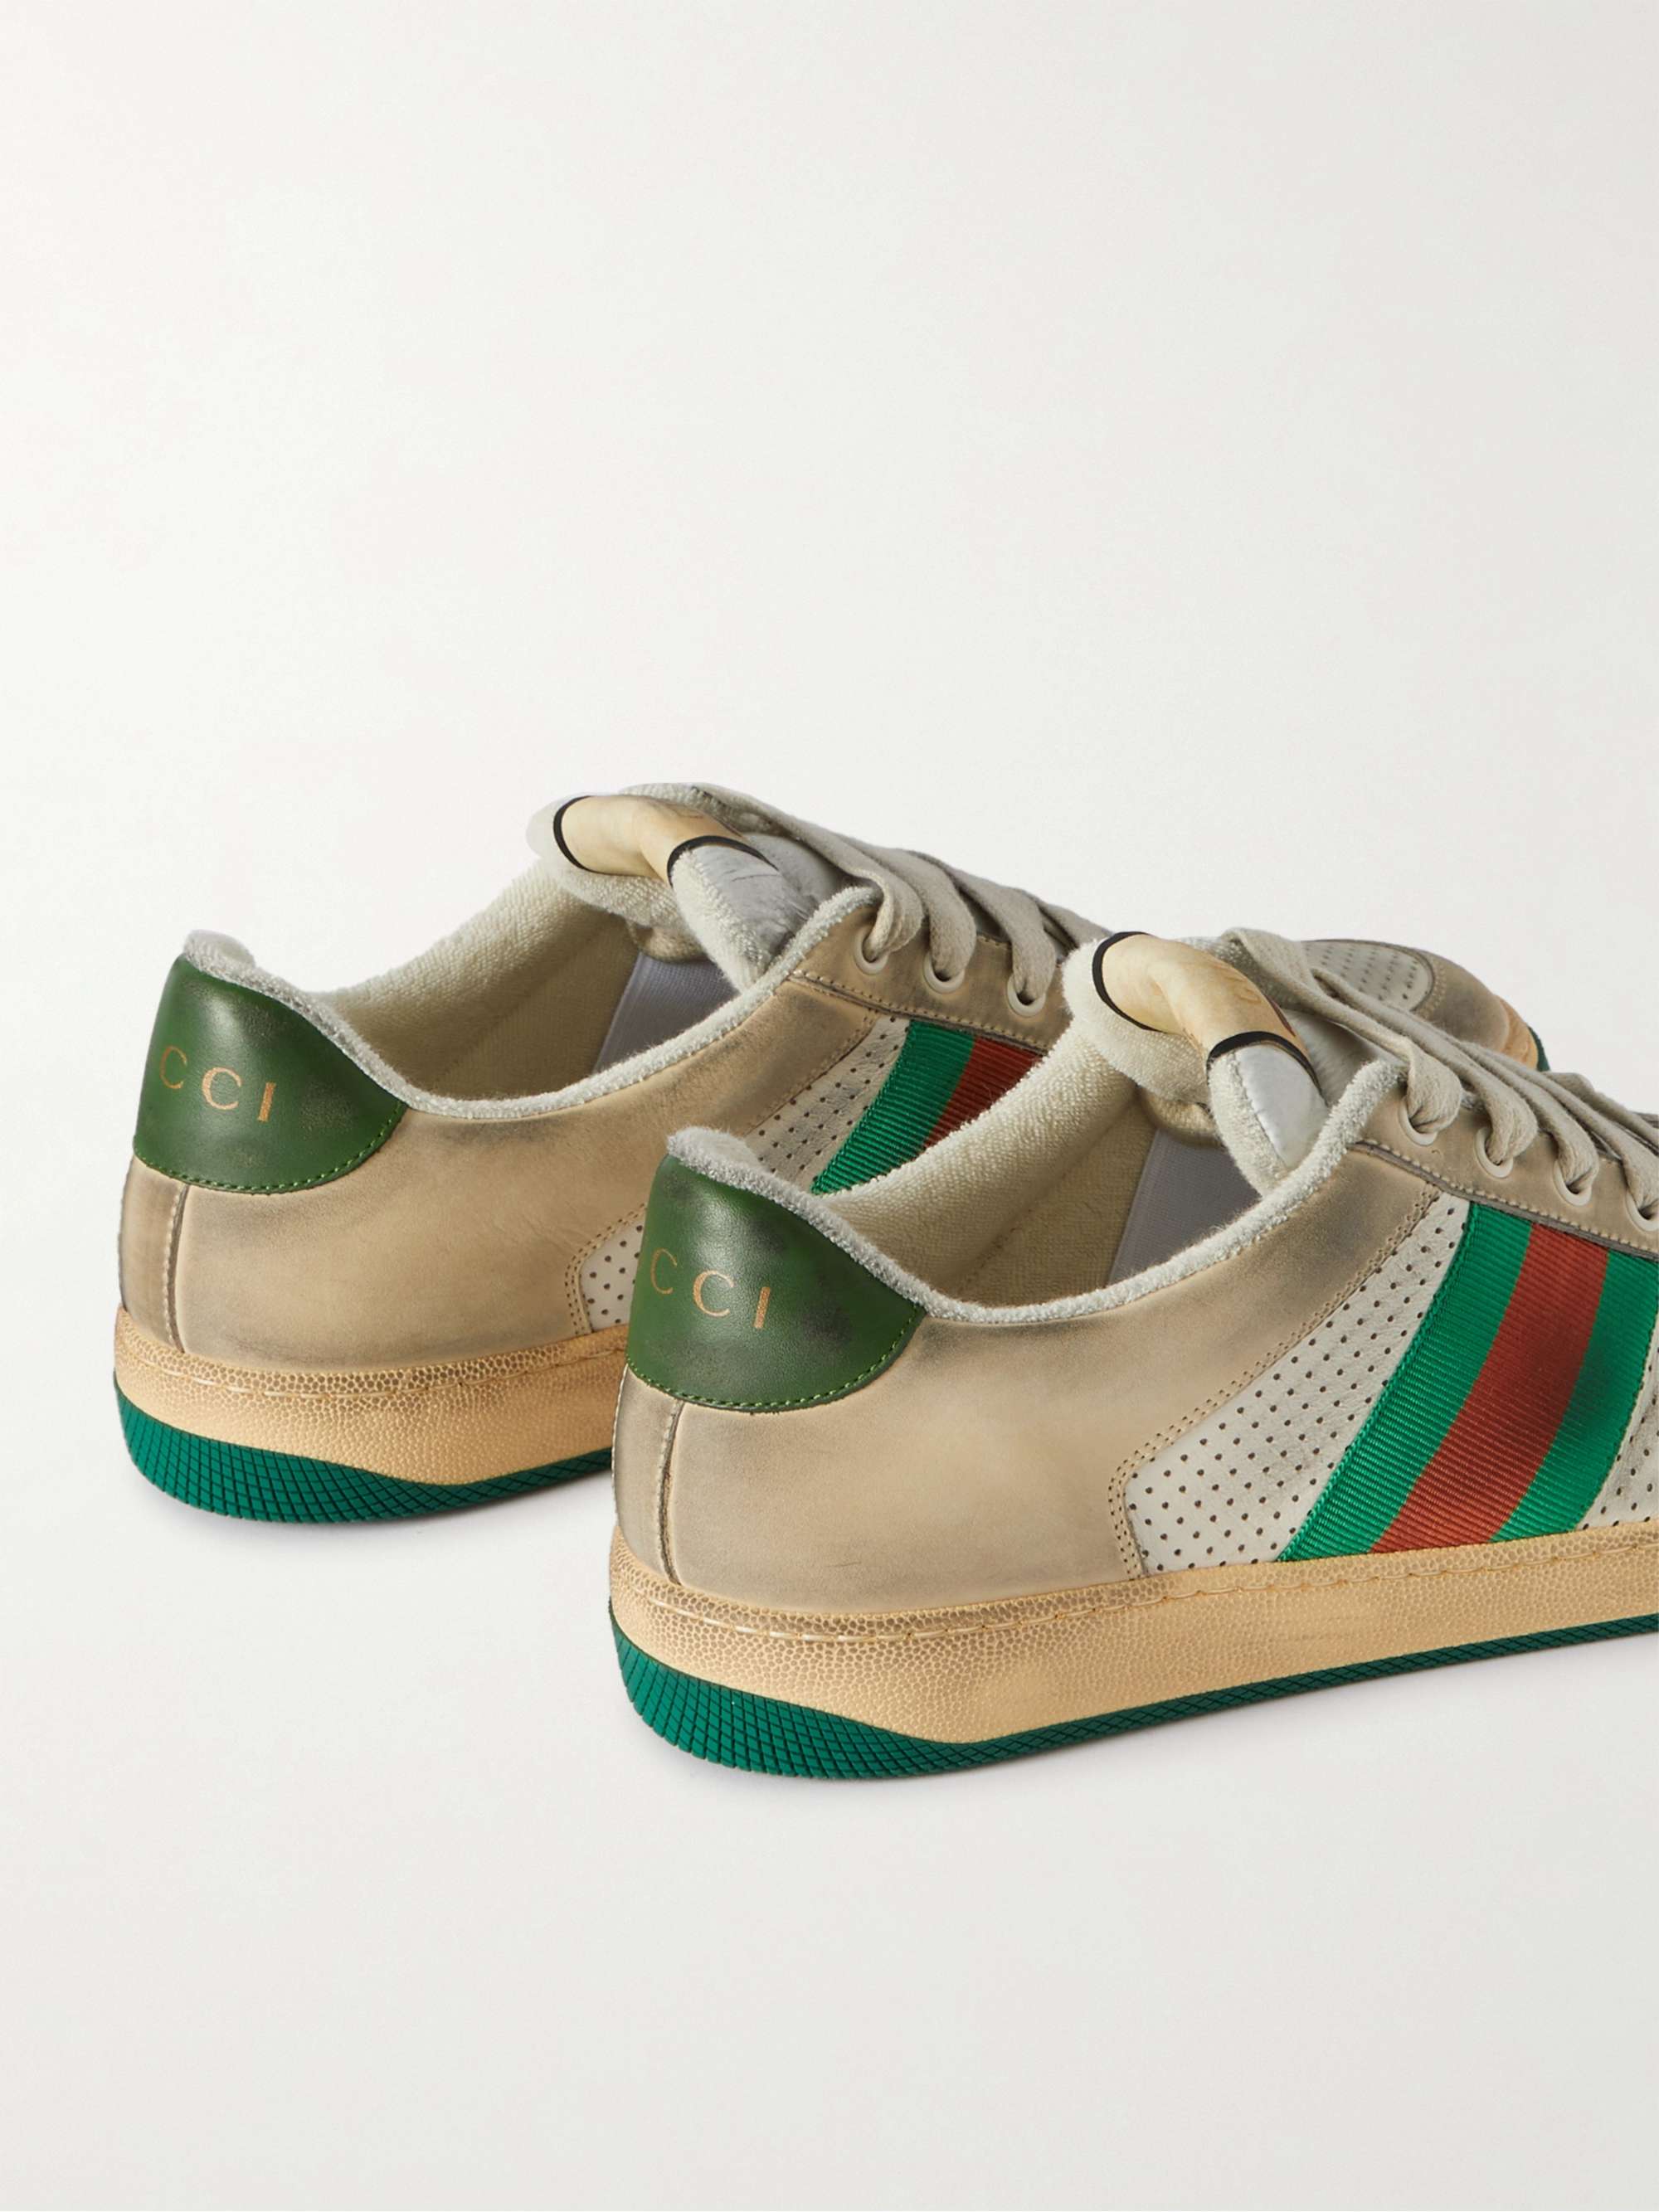 GUCCI Virtus Distressed Leather and Webbing Sneakers